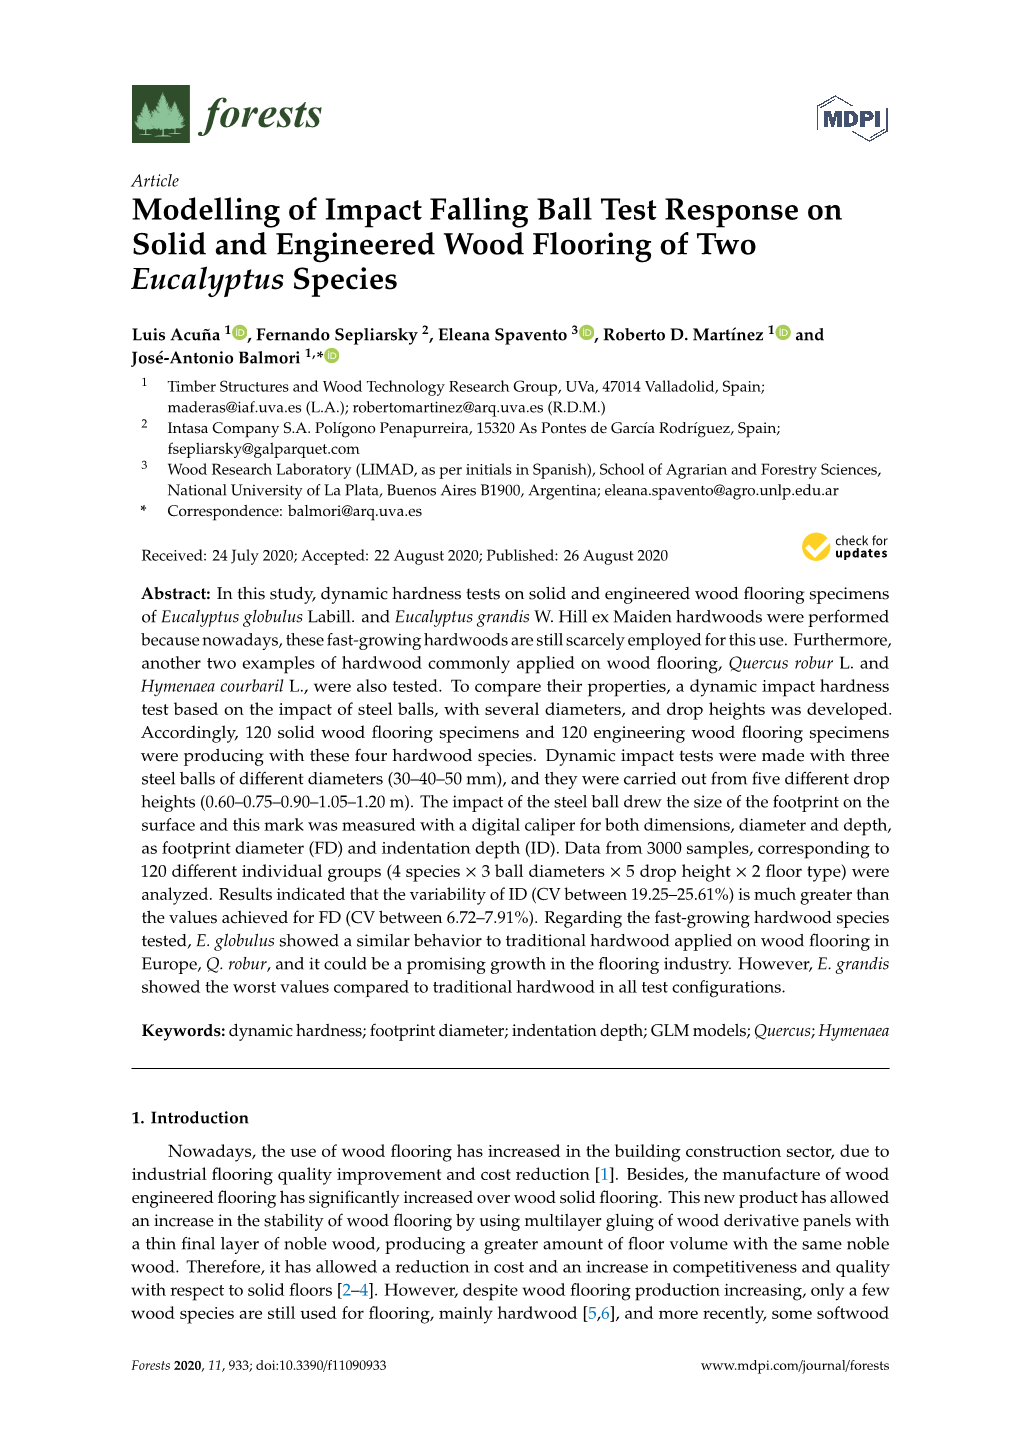 Modelling of Impact Falling Ball Test Response on Solid and Engineered Wood Flooring of Two Eucalyptus Species